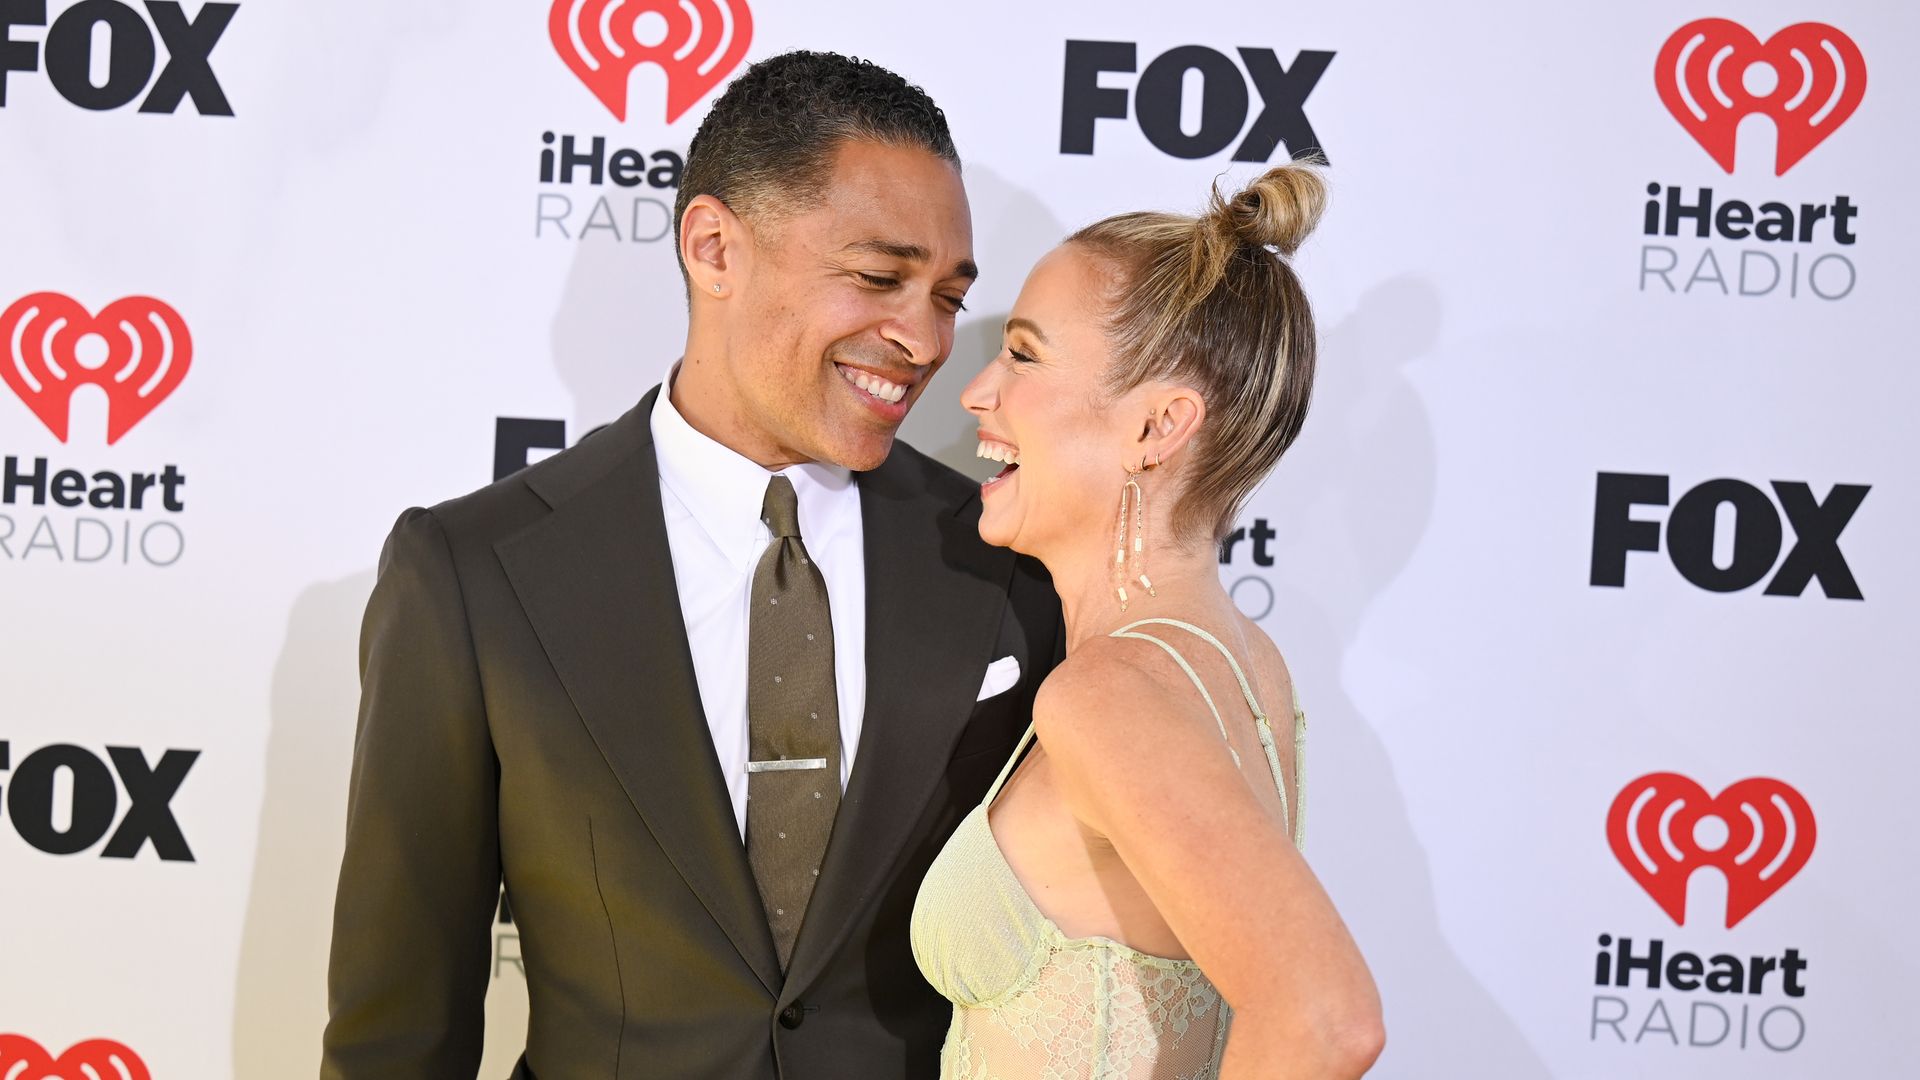 T.J. Holmes calls out Amy Robach for 'ghosting' him and discusses major move in their relationship